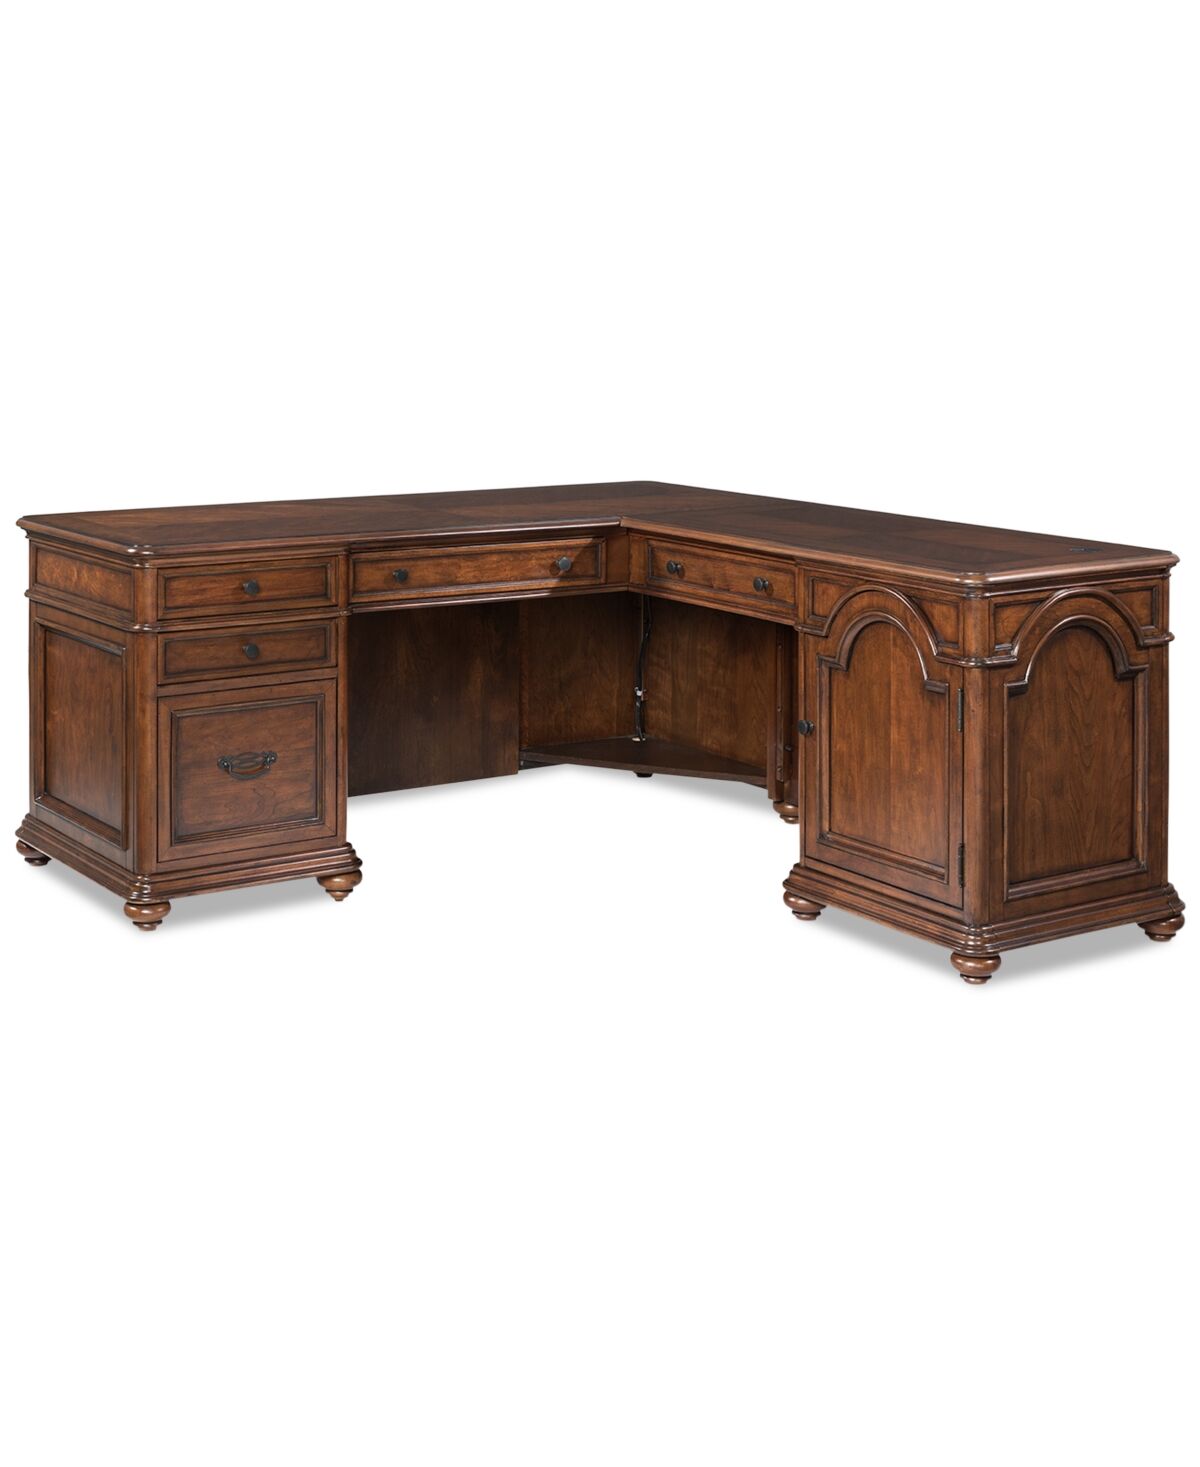 Furniture Clinton Hill Cherry Home Office L-Shaped Desk - Cherry